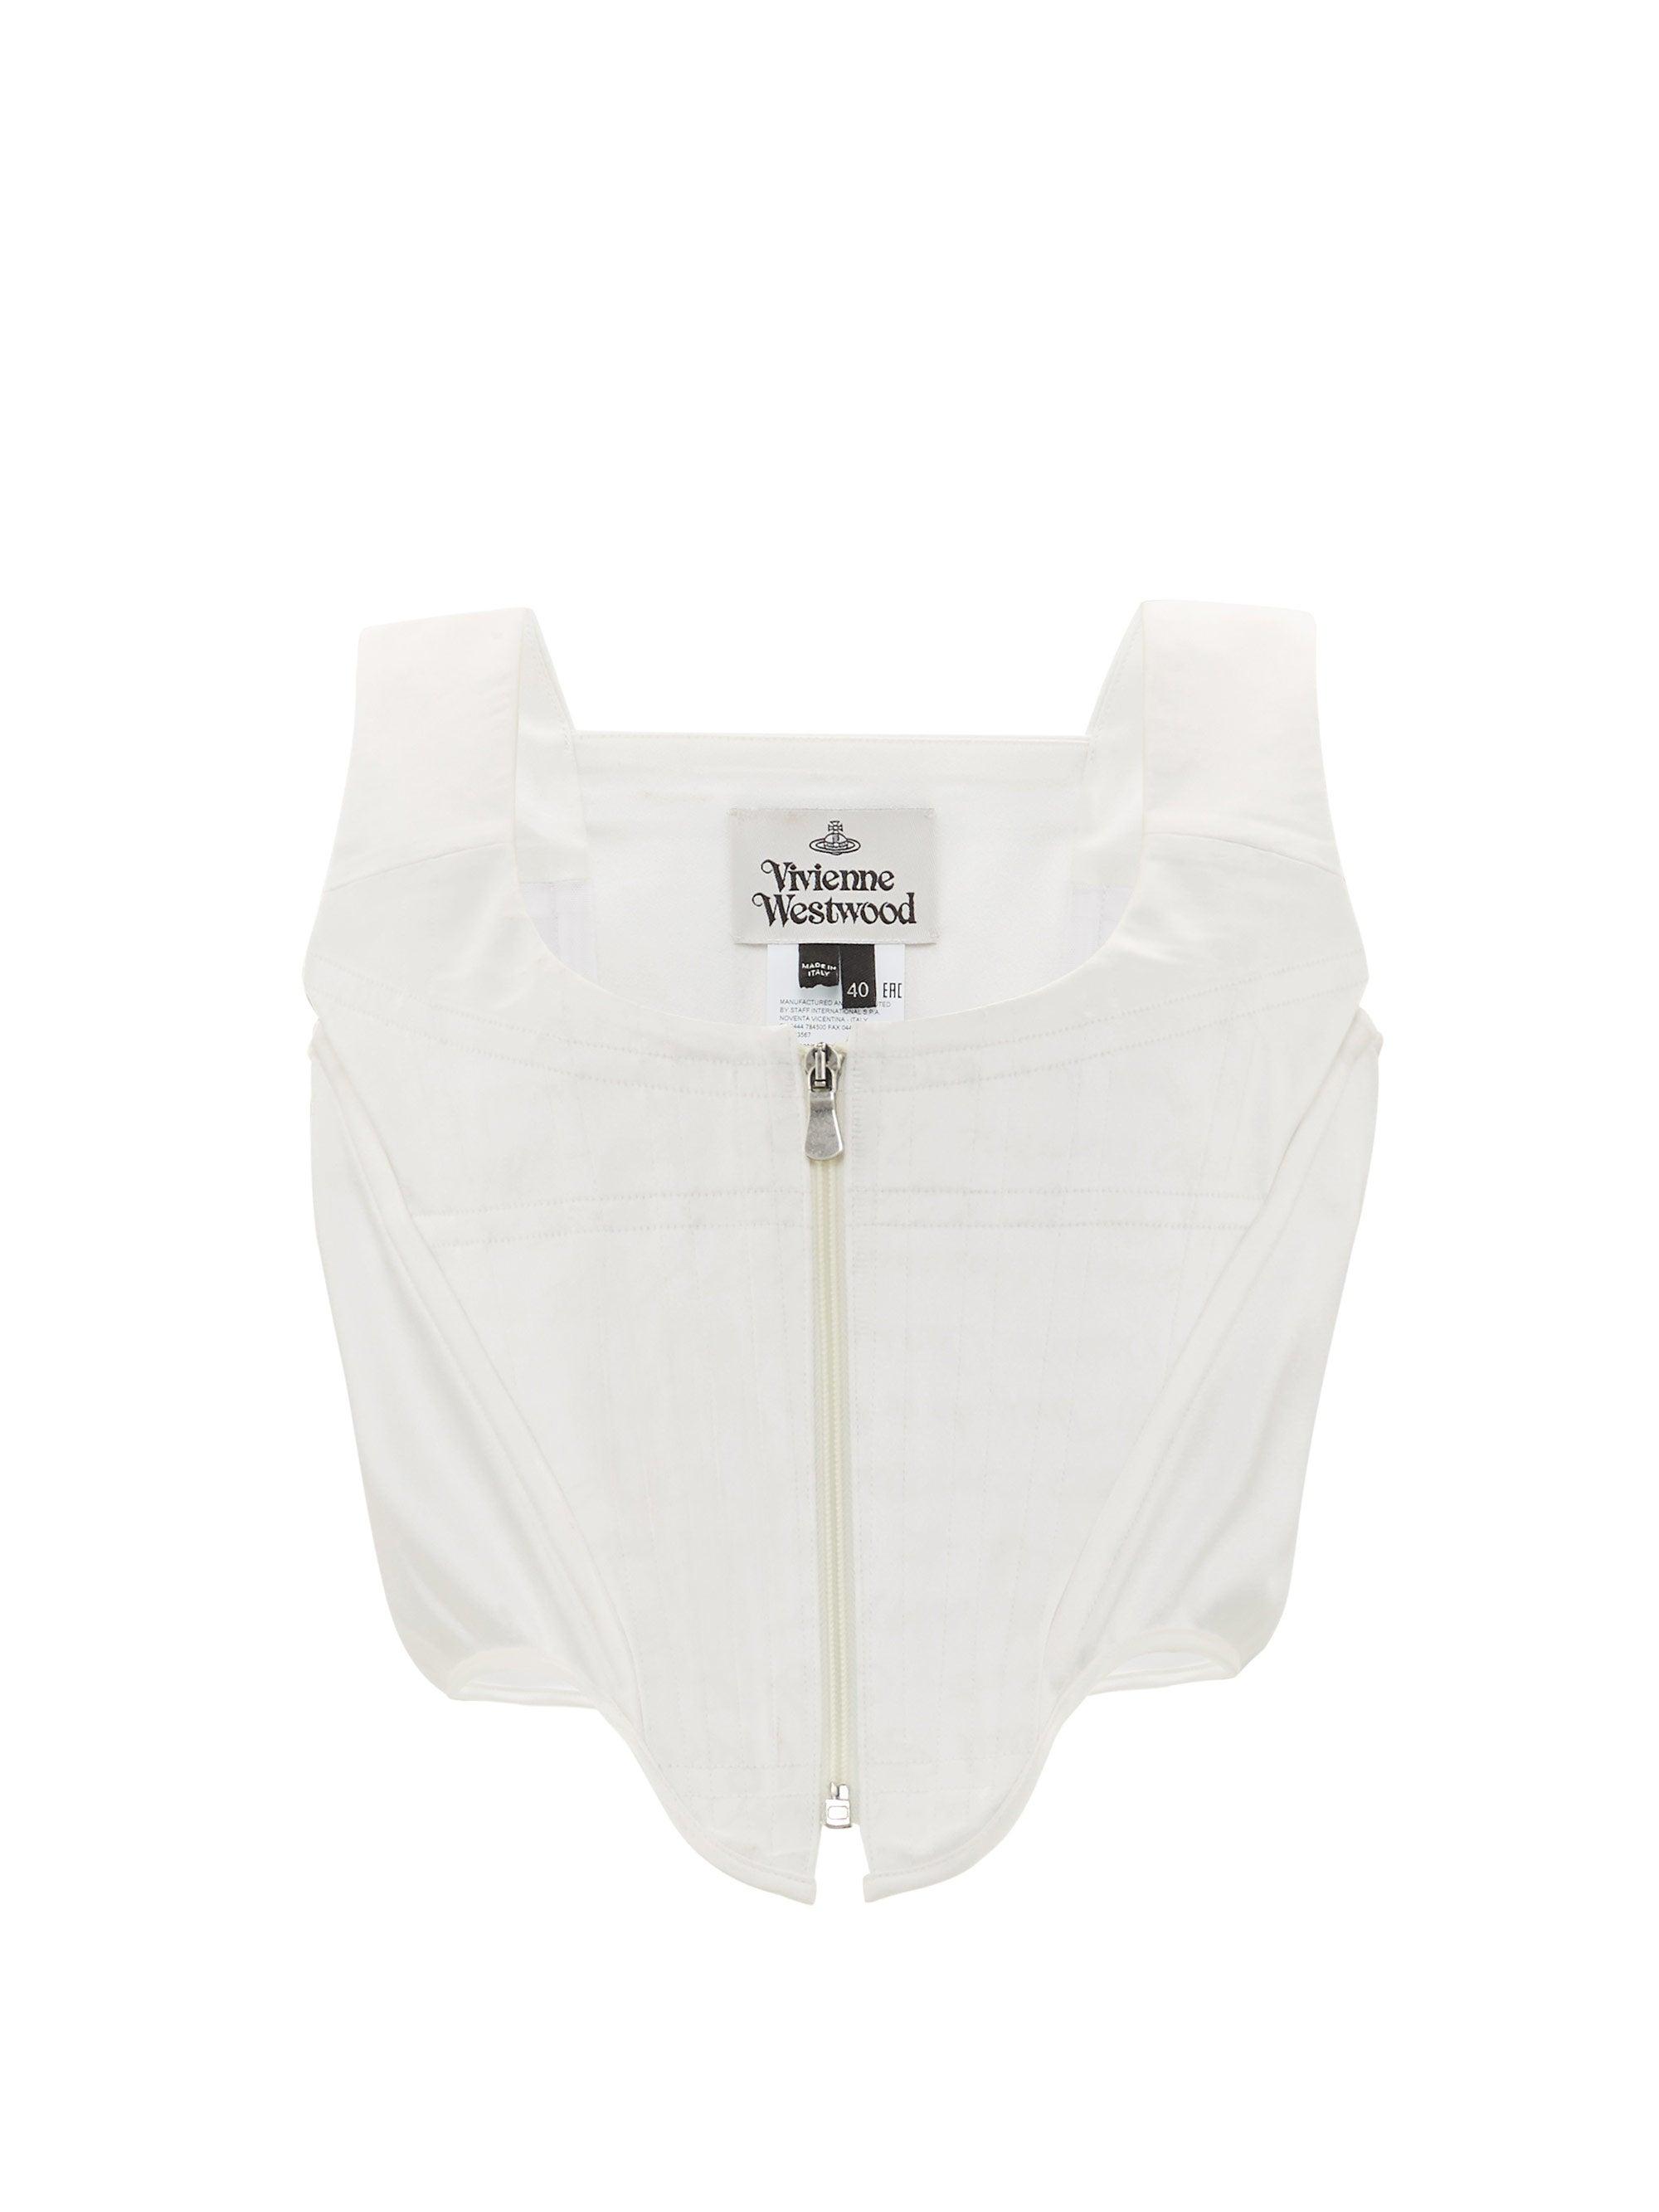 Vivienne Westwood Zipped Charmeuse Corset Top in White | Lyst